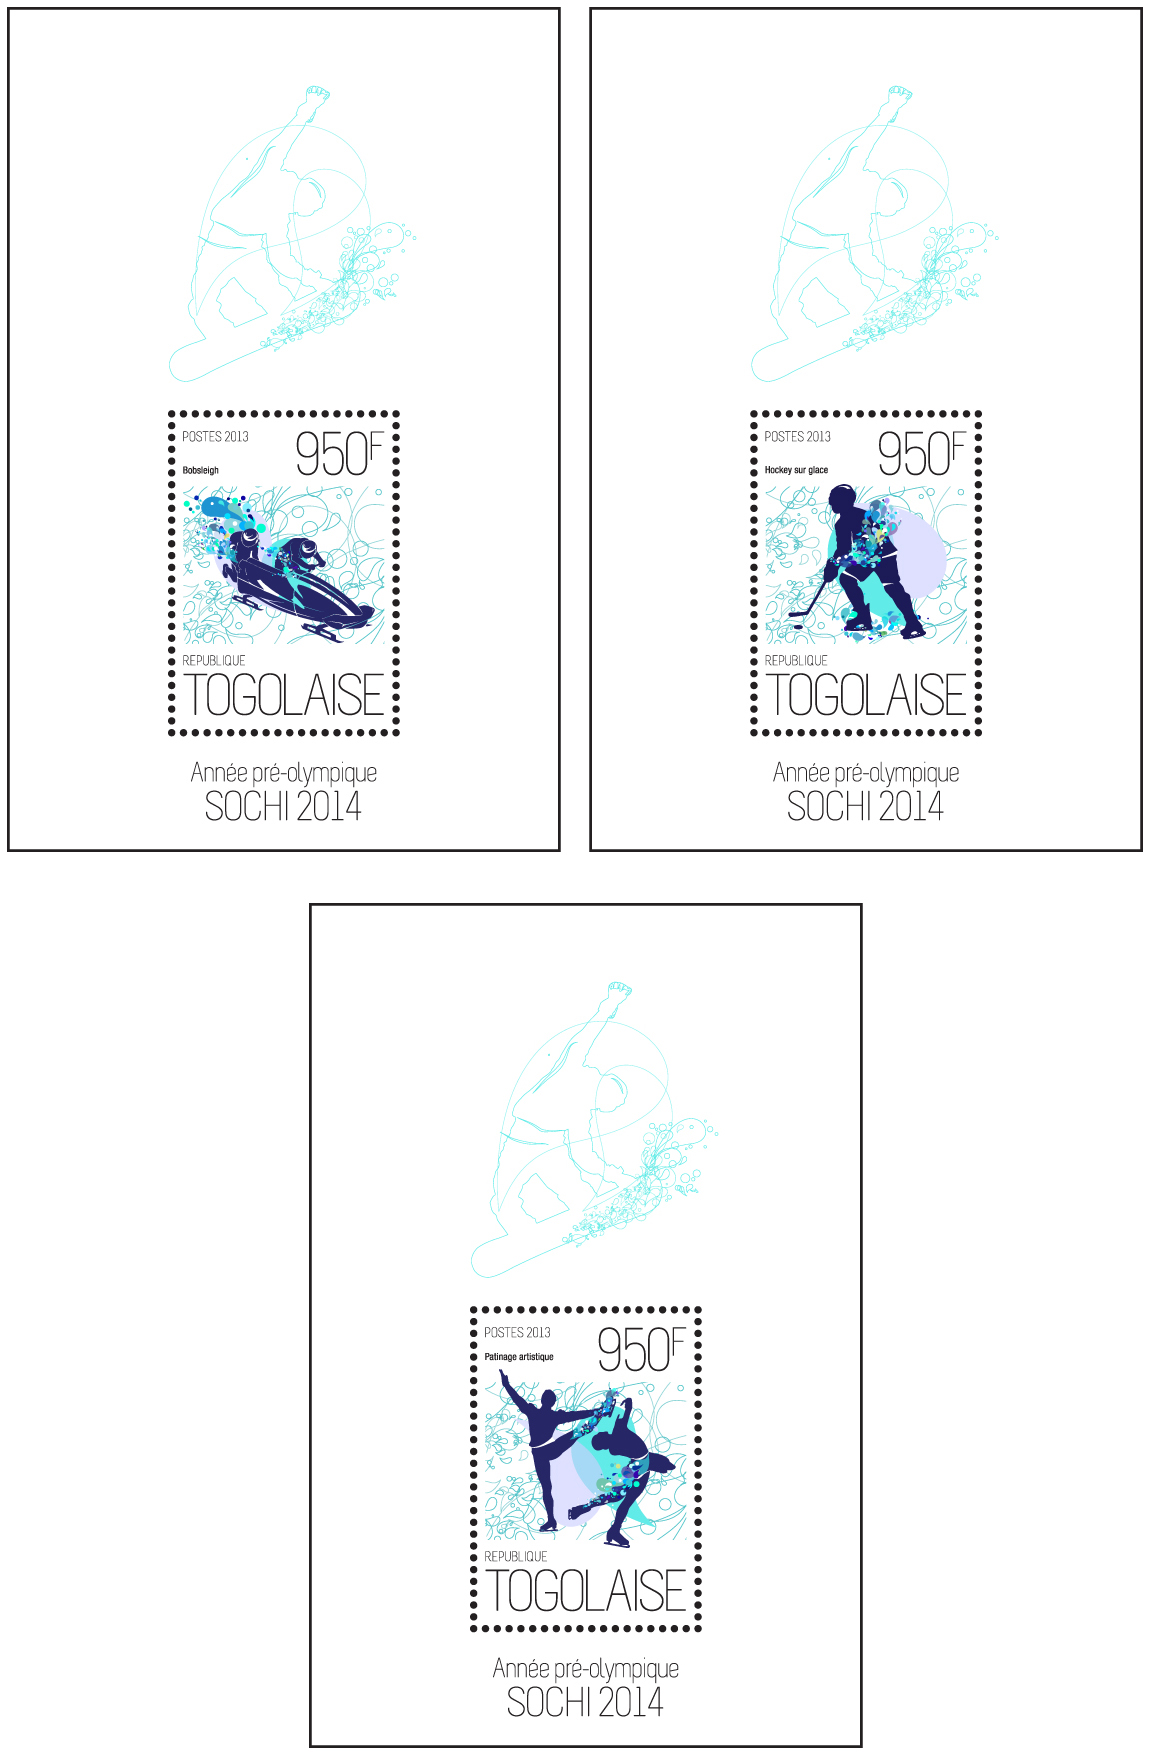 Sochi 2014 - Issue of Togo postage stamps